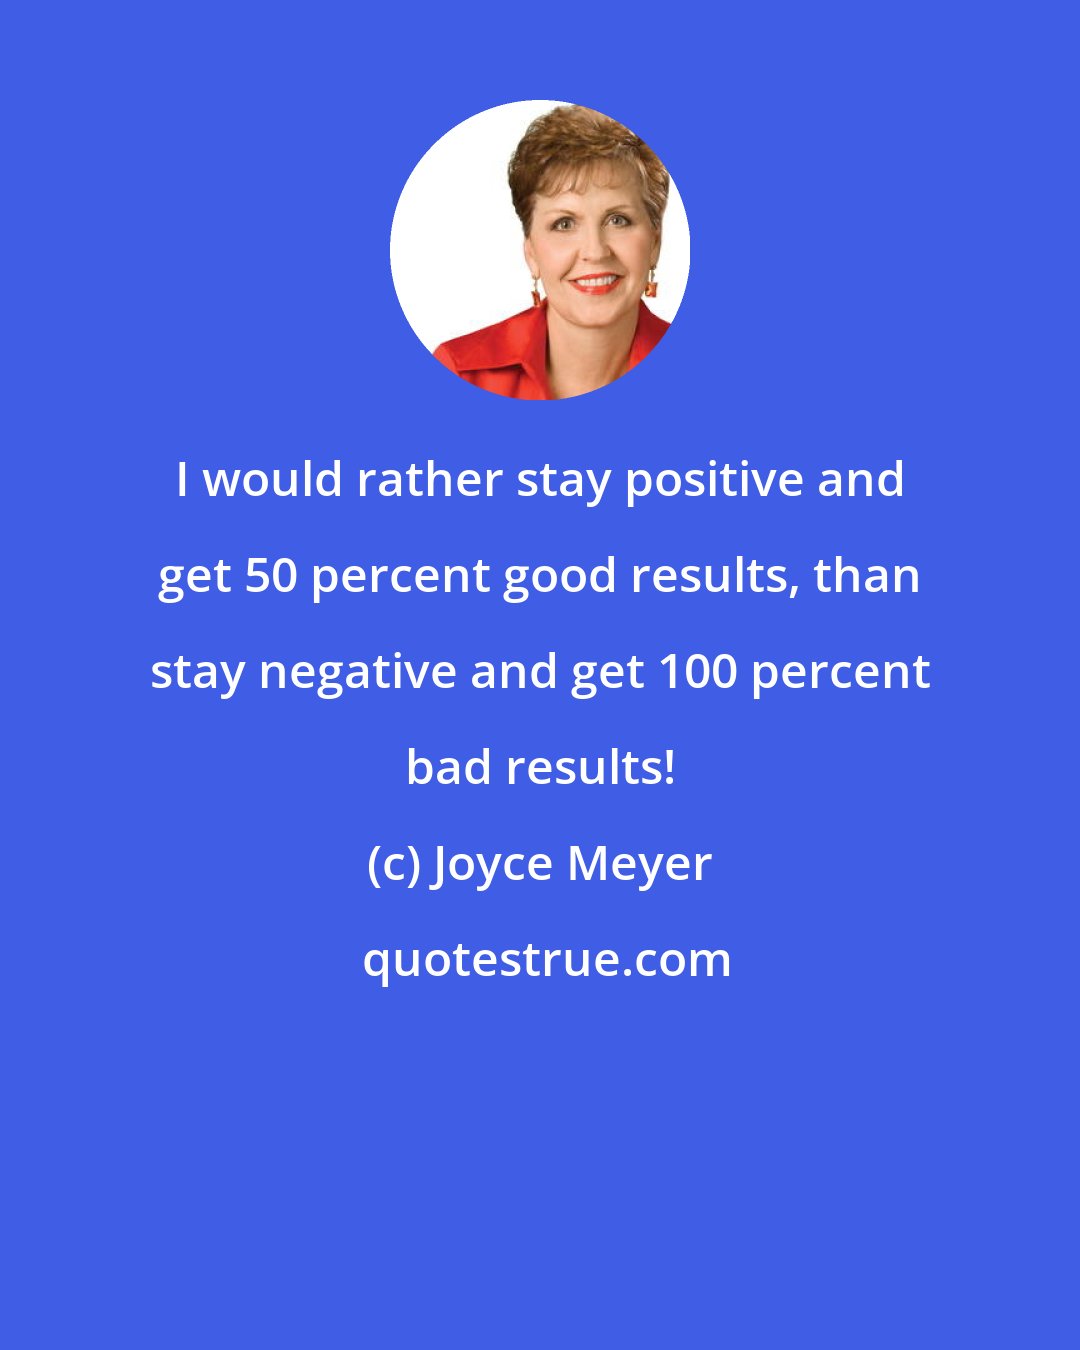 Joyce Meyer: I would rather stay positive and get 50 percent good results, than stay negative and get 100 percent bad results!